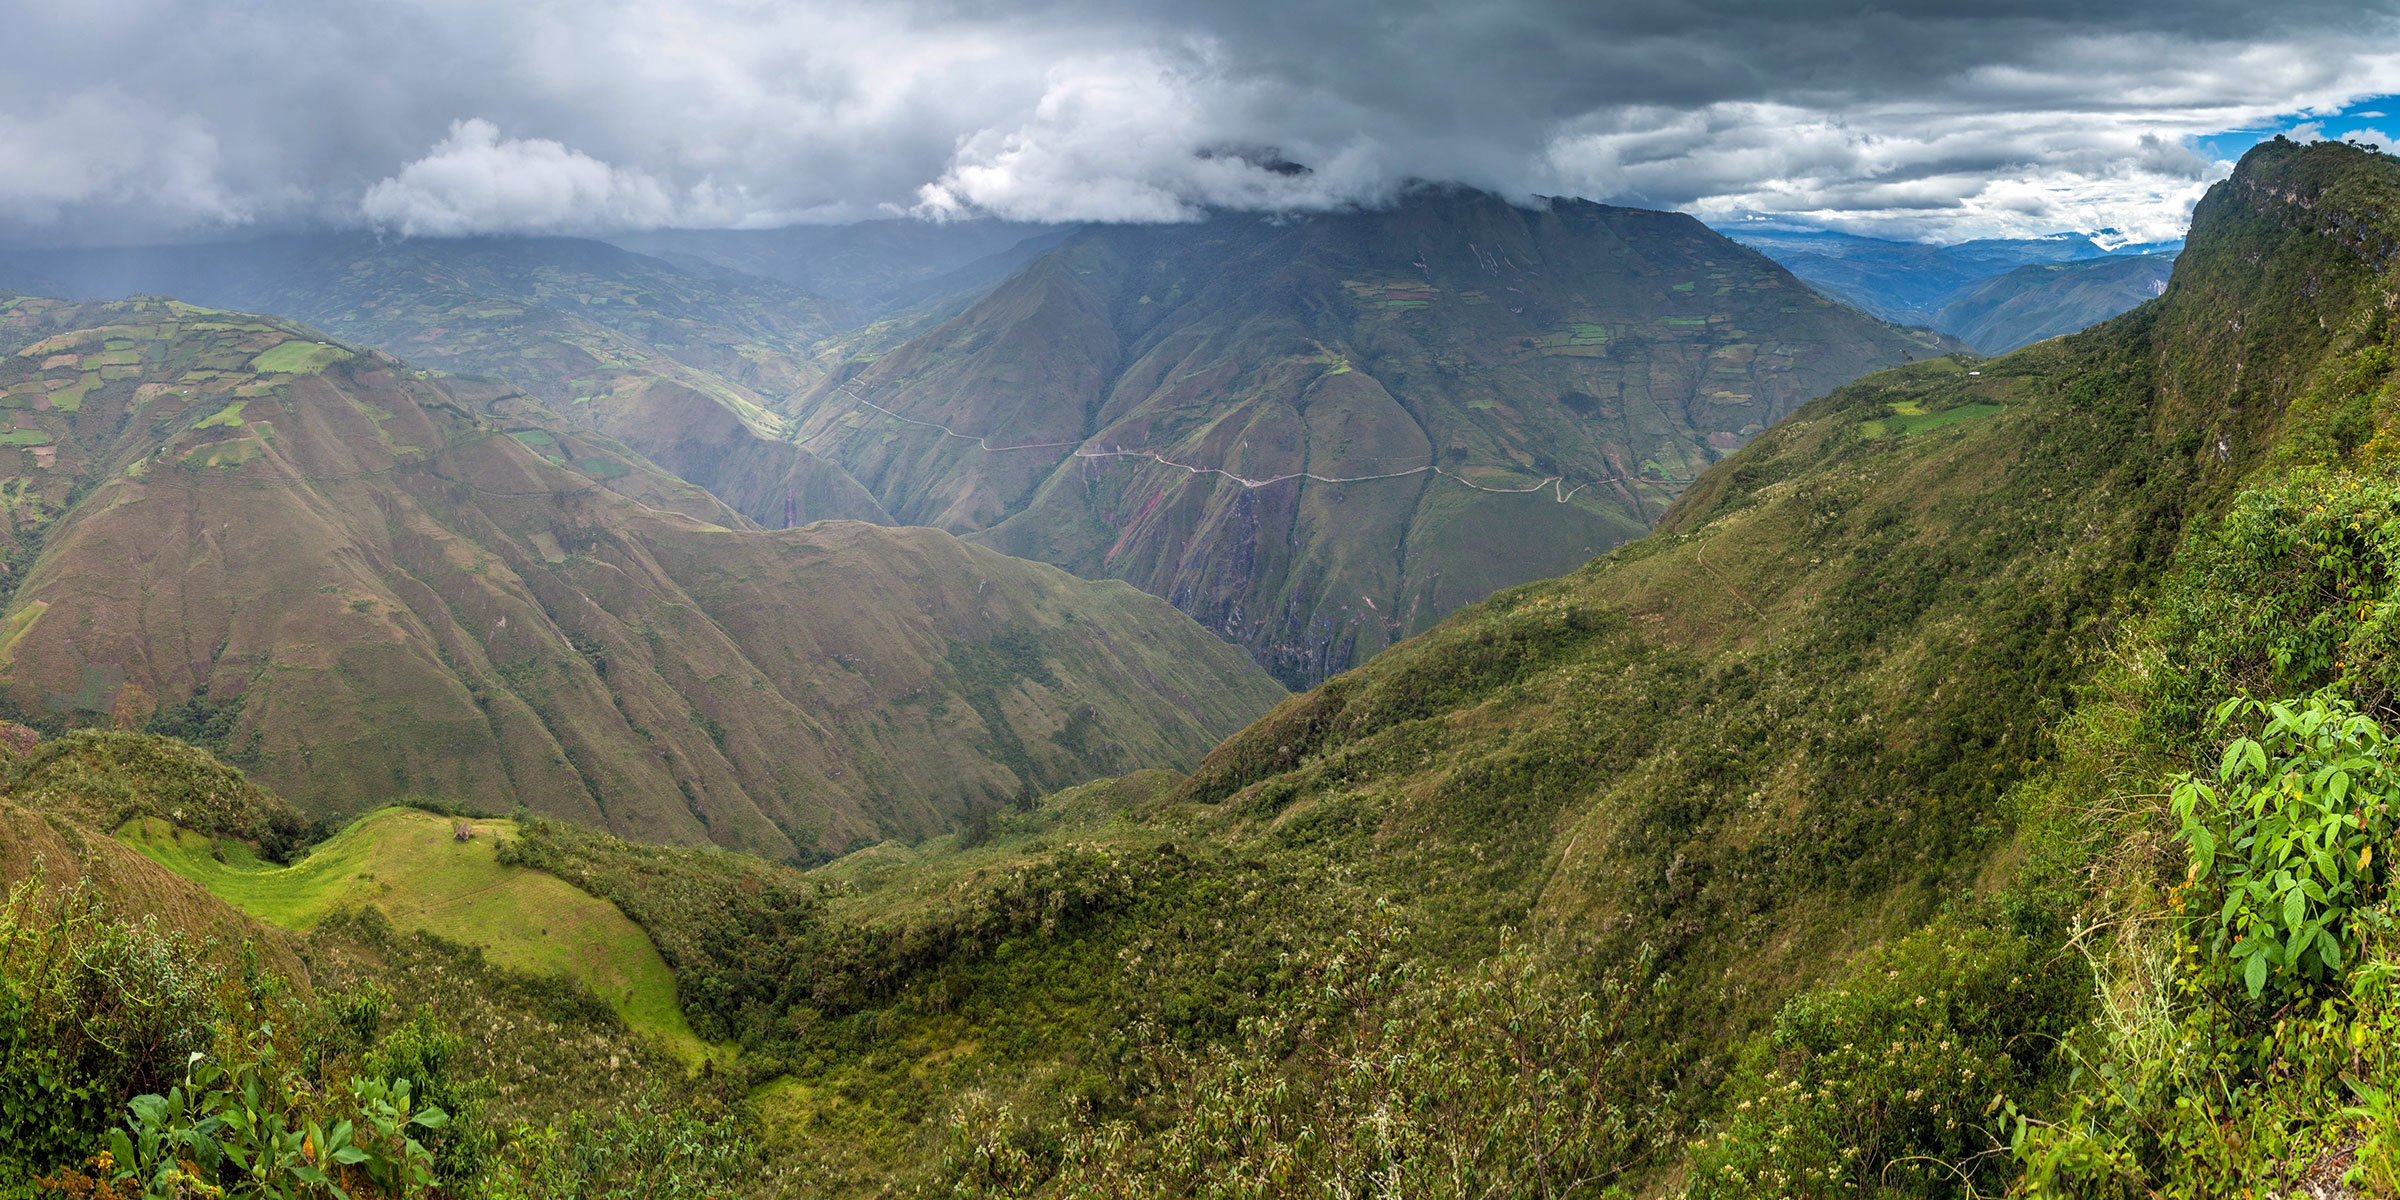 Panorama of verdant mountains and clouds near the Kuelap ruins in Peru